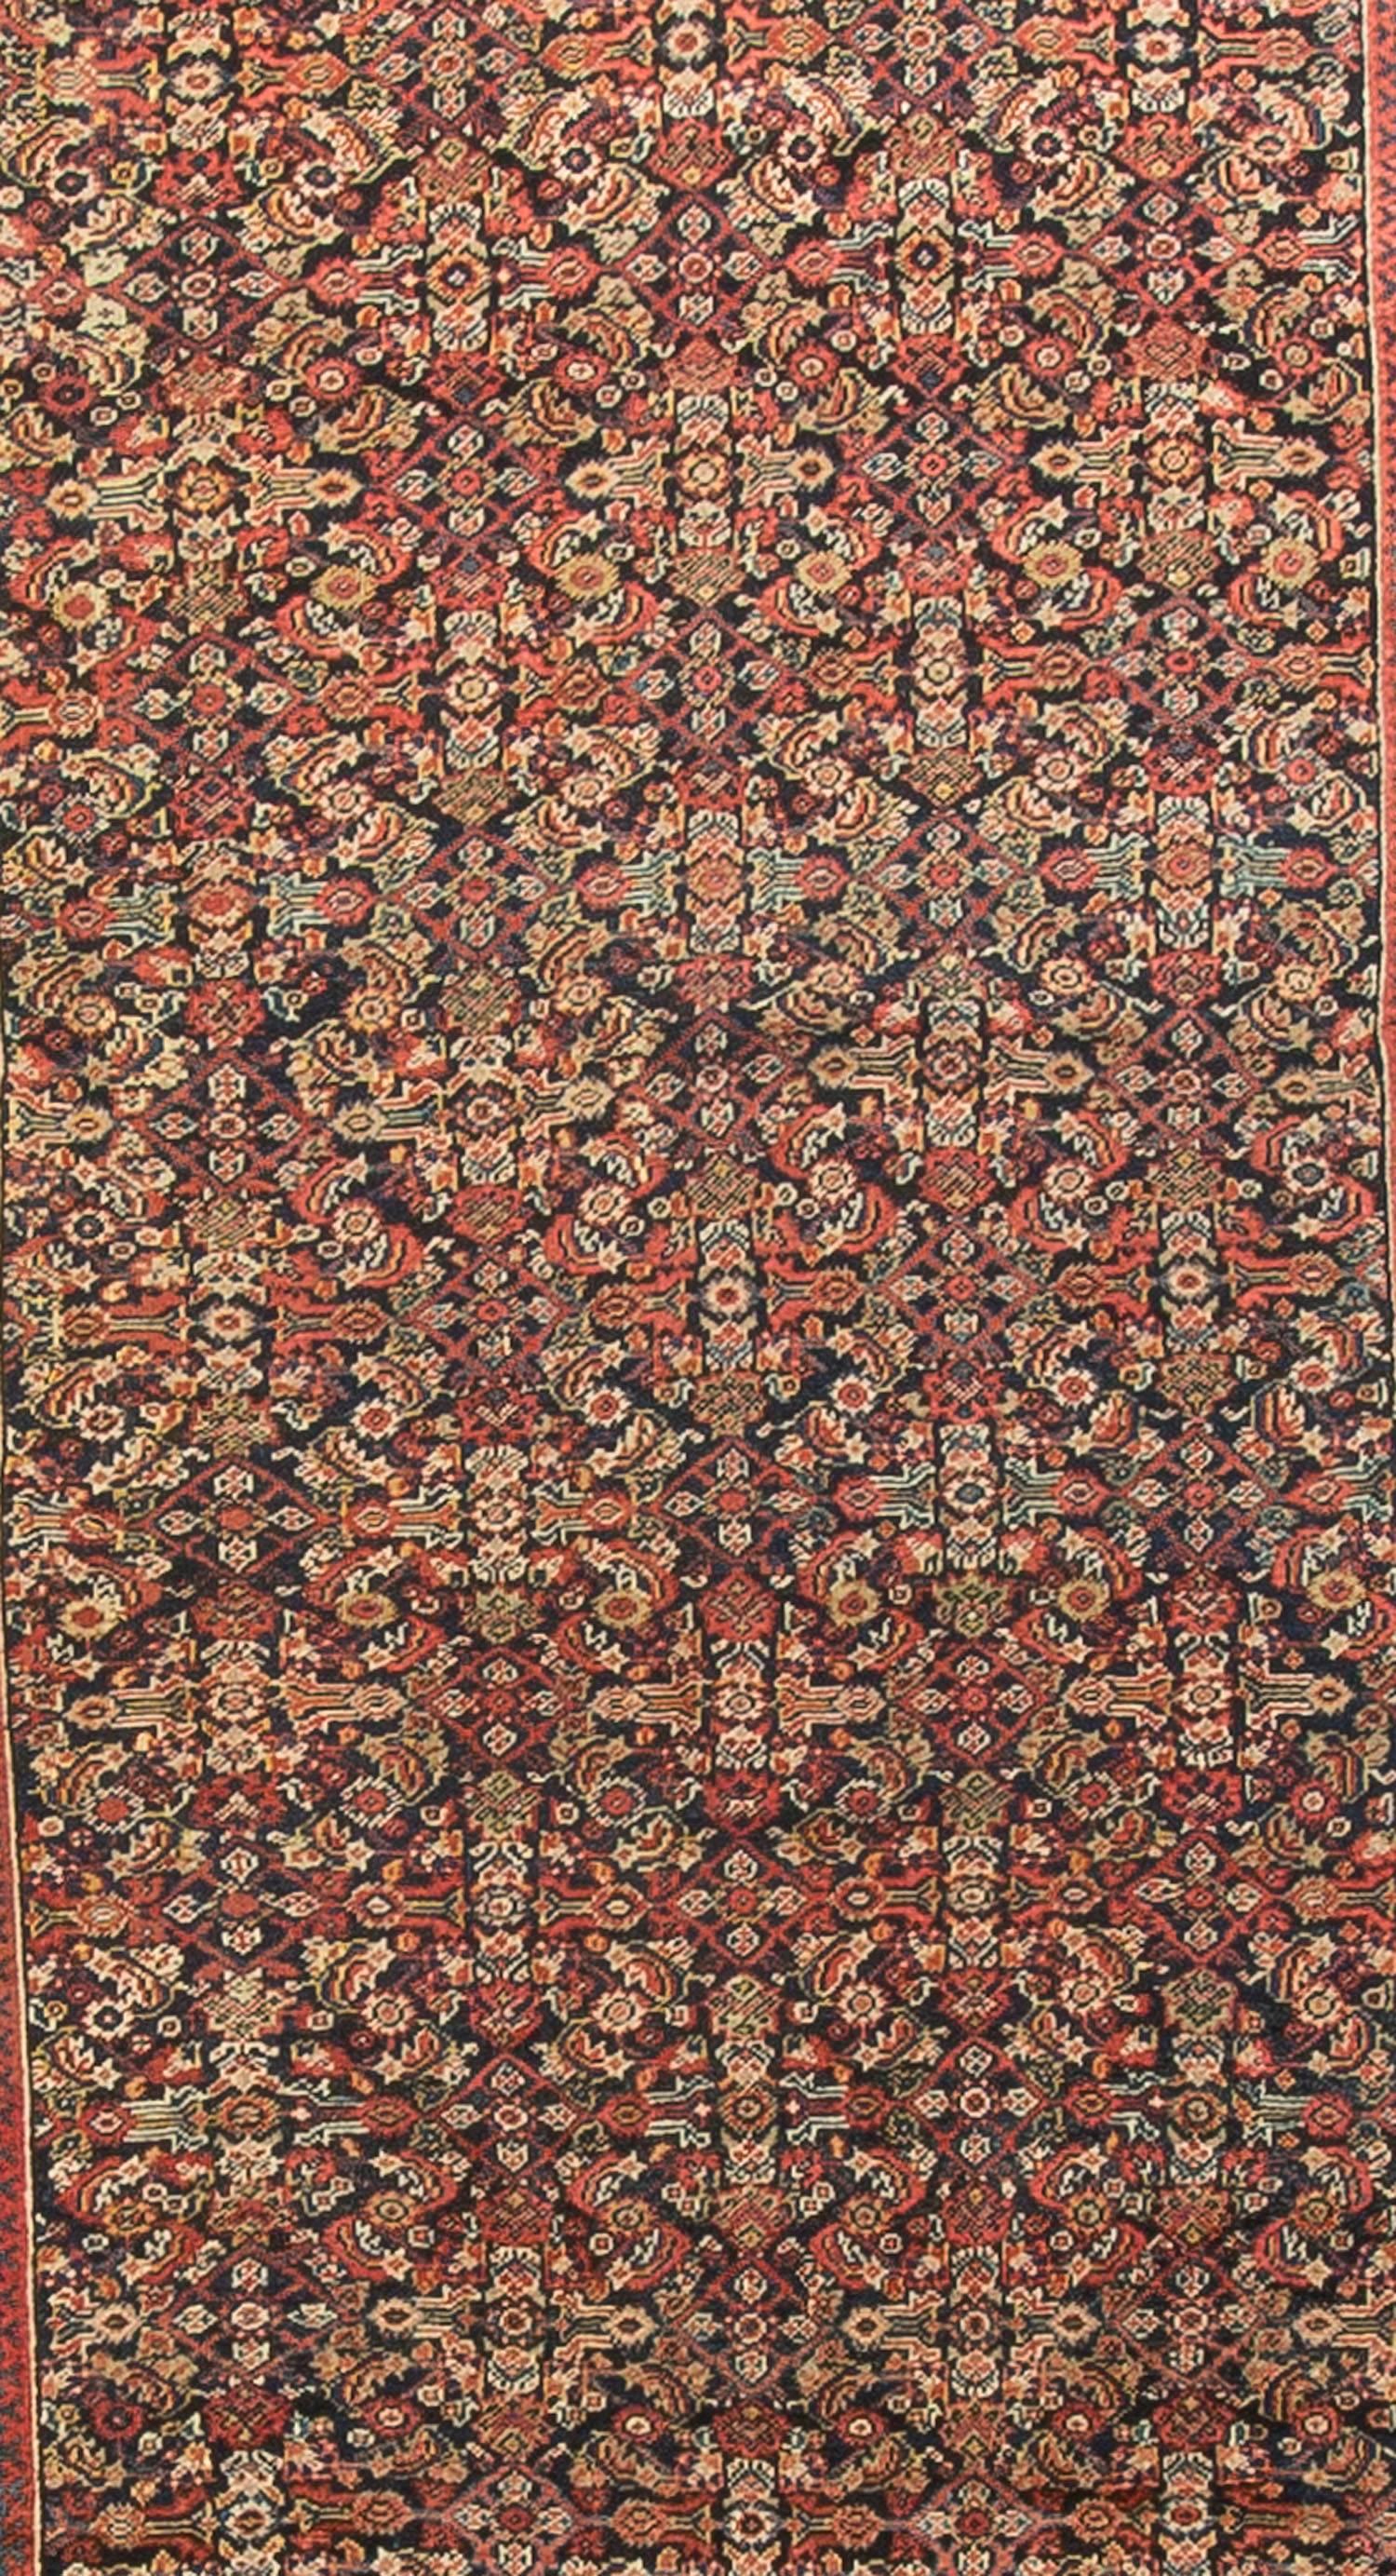 Now in Markazi Province, west Persia, the Feraghan district has woven a variety of styles and textures from good to truly exceptional quality from the 18th century onwards. The most recognizable are the dark blue gallery rugs with all-over repeating